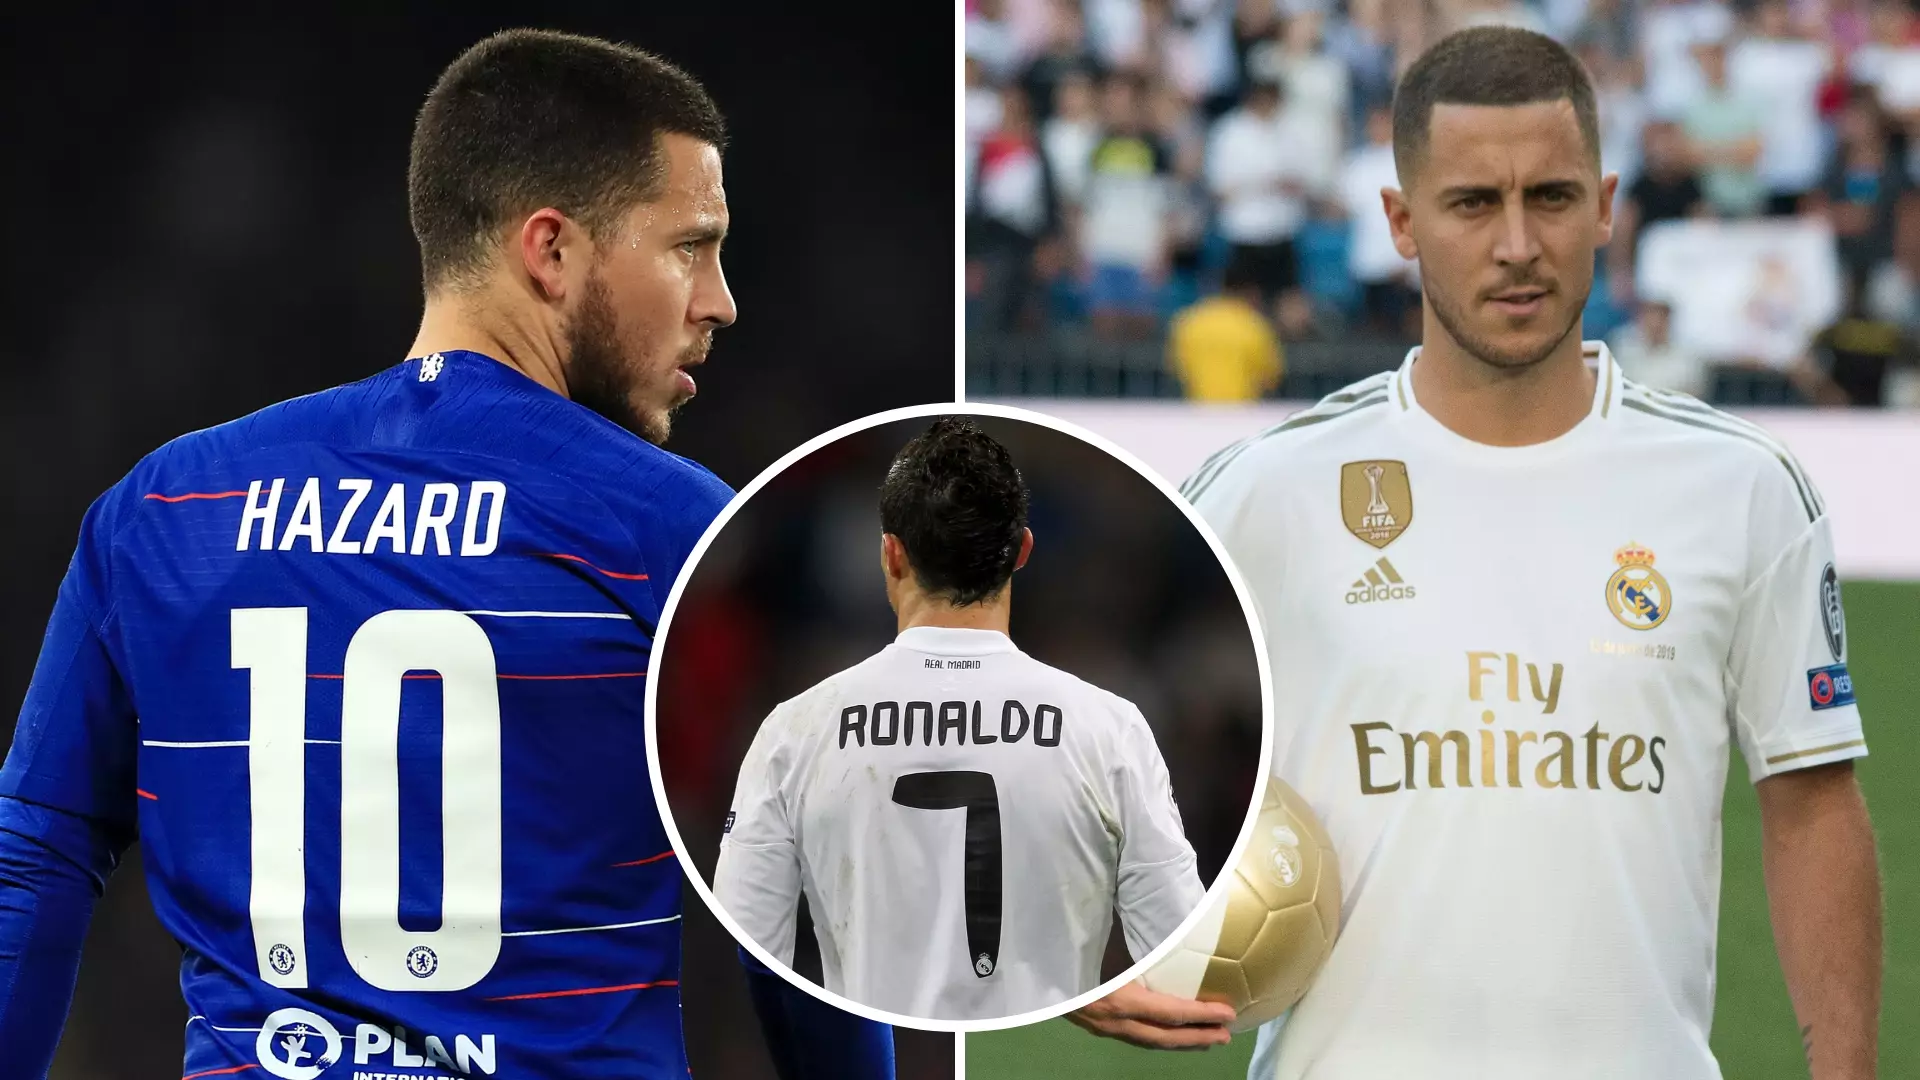 Eden Hazard Won’t Receive No 7 Shirt At Real Madrid And Will Pick No 23 Instead